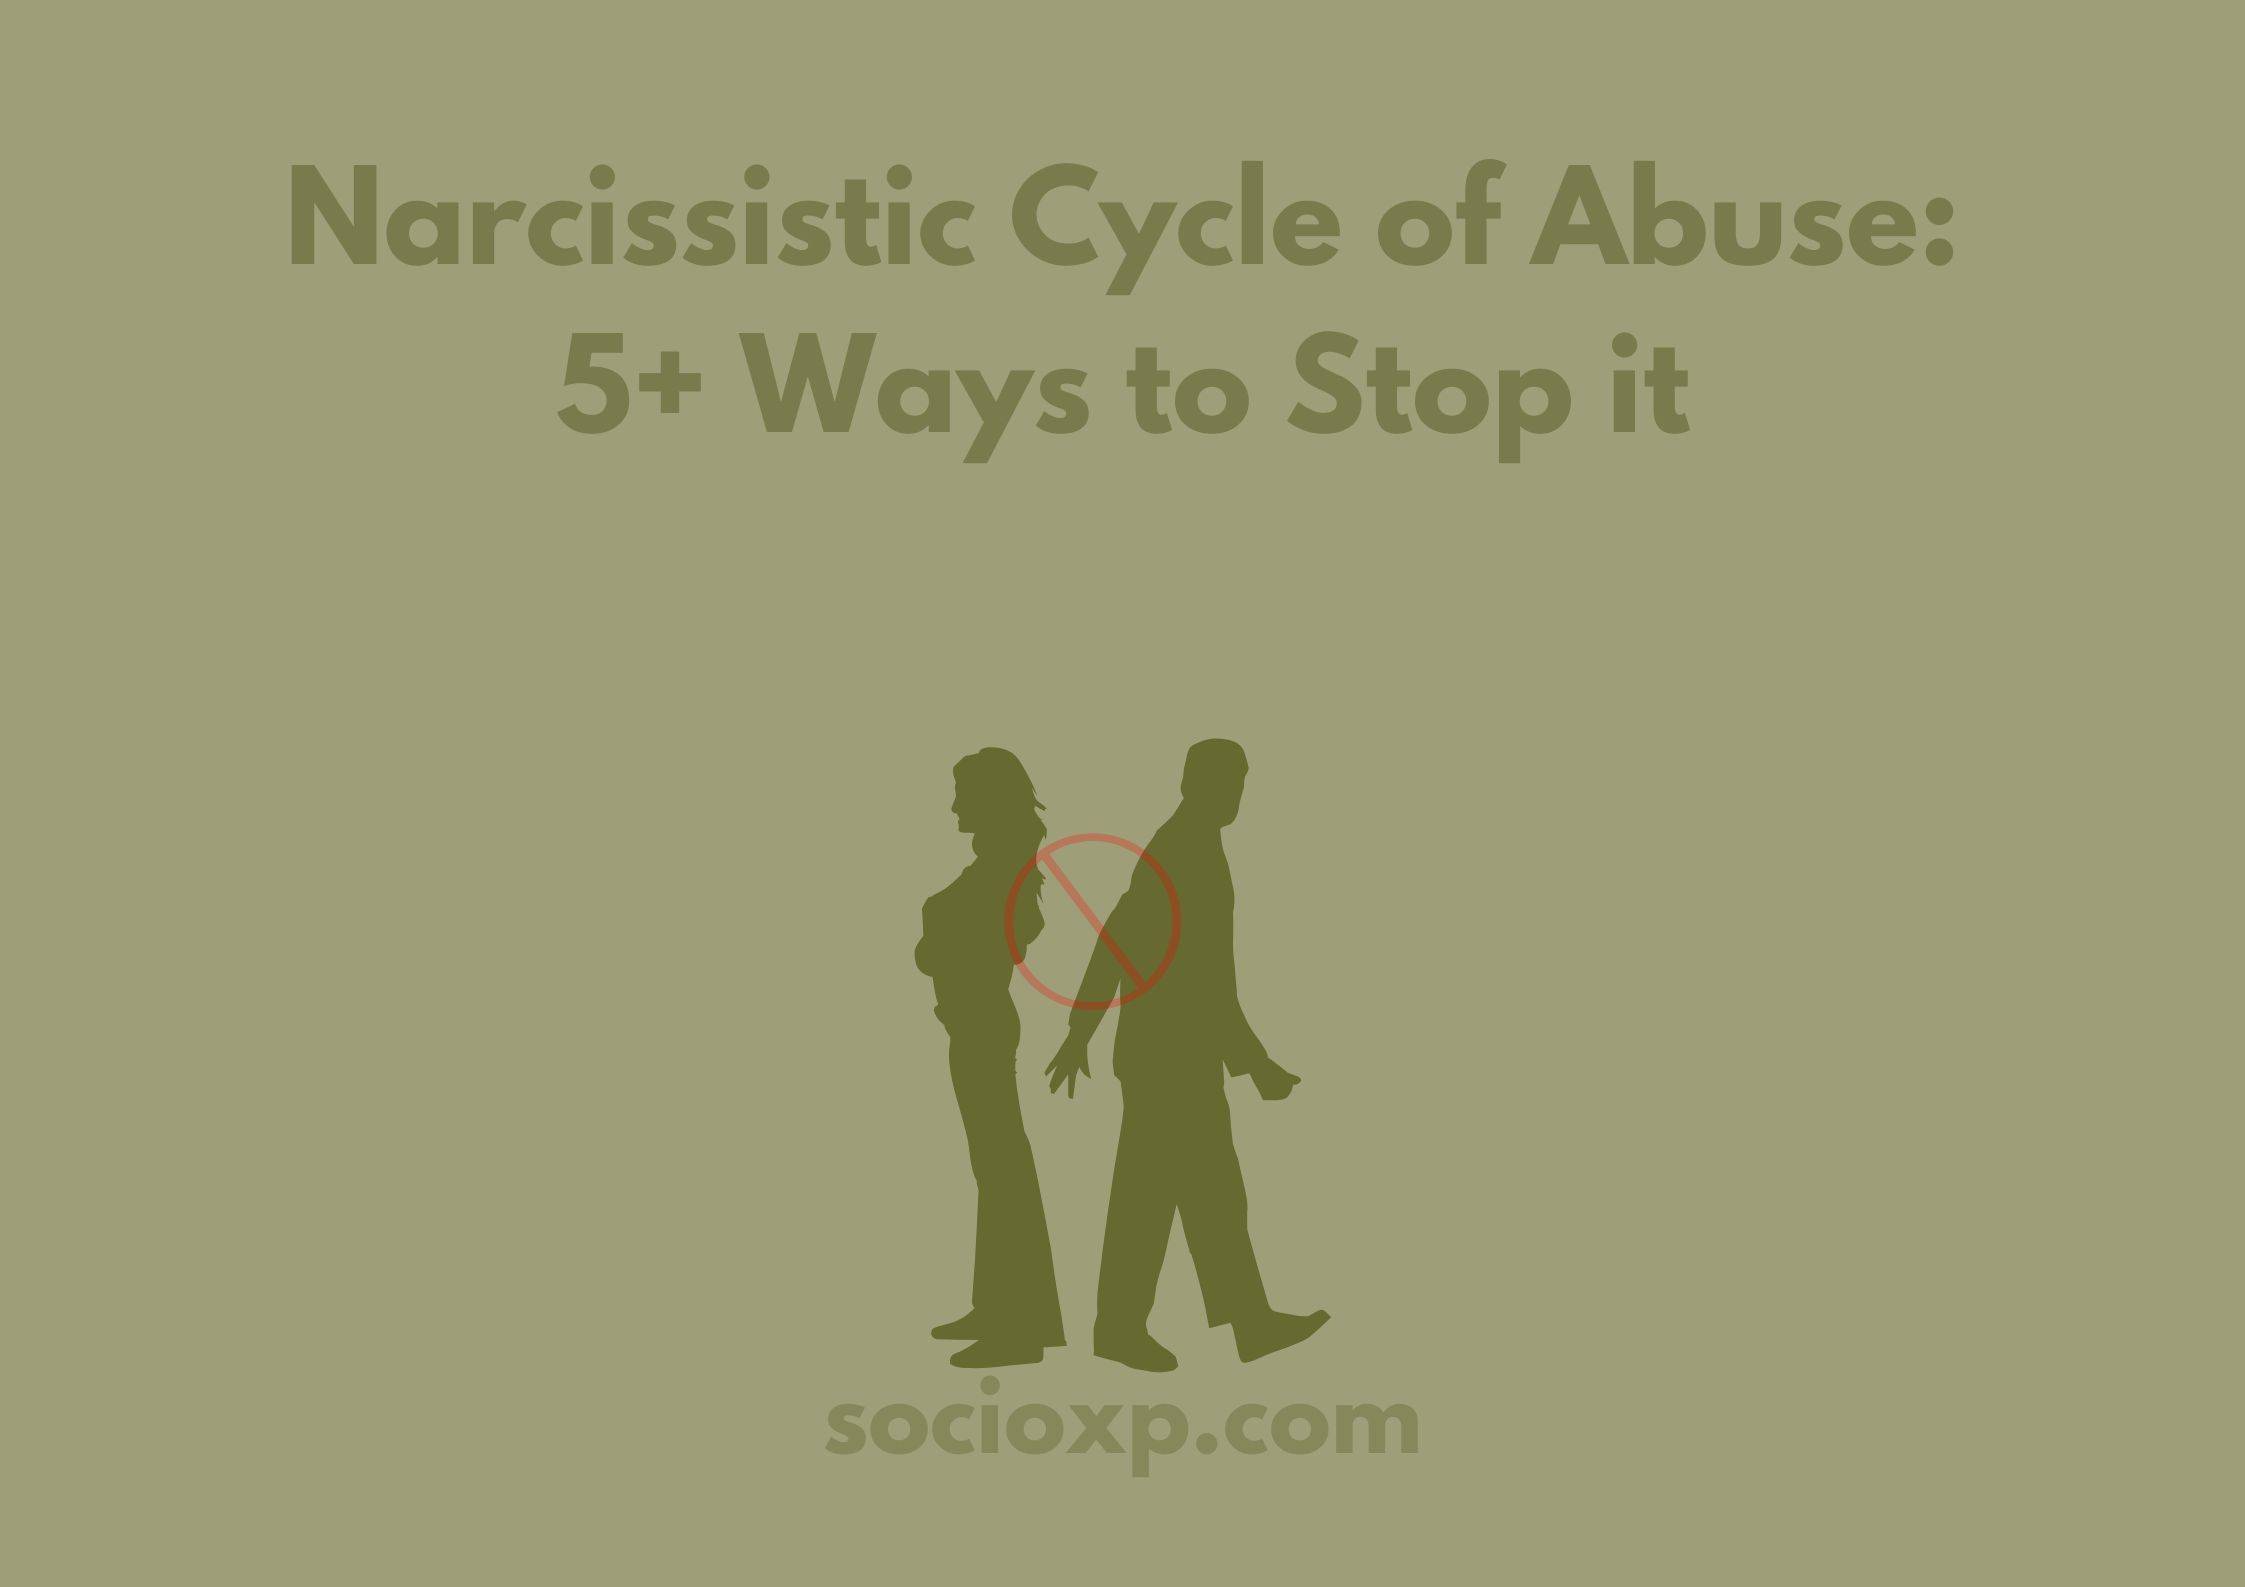 Narcissistic Cycle of Abuse: 5+ Ways to Stop it